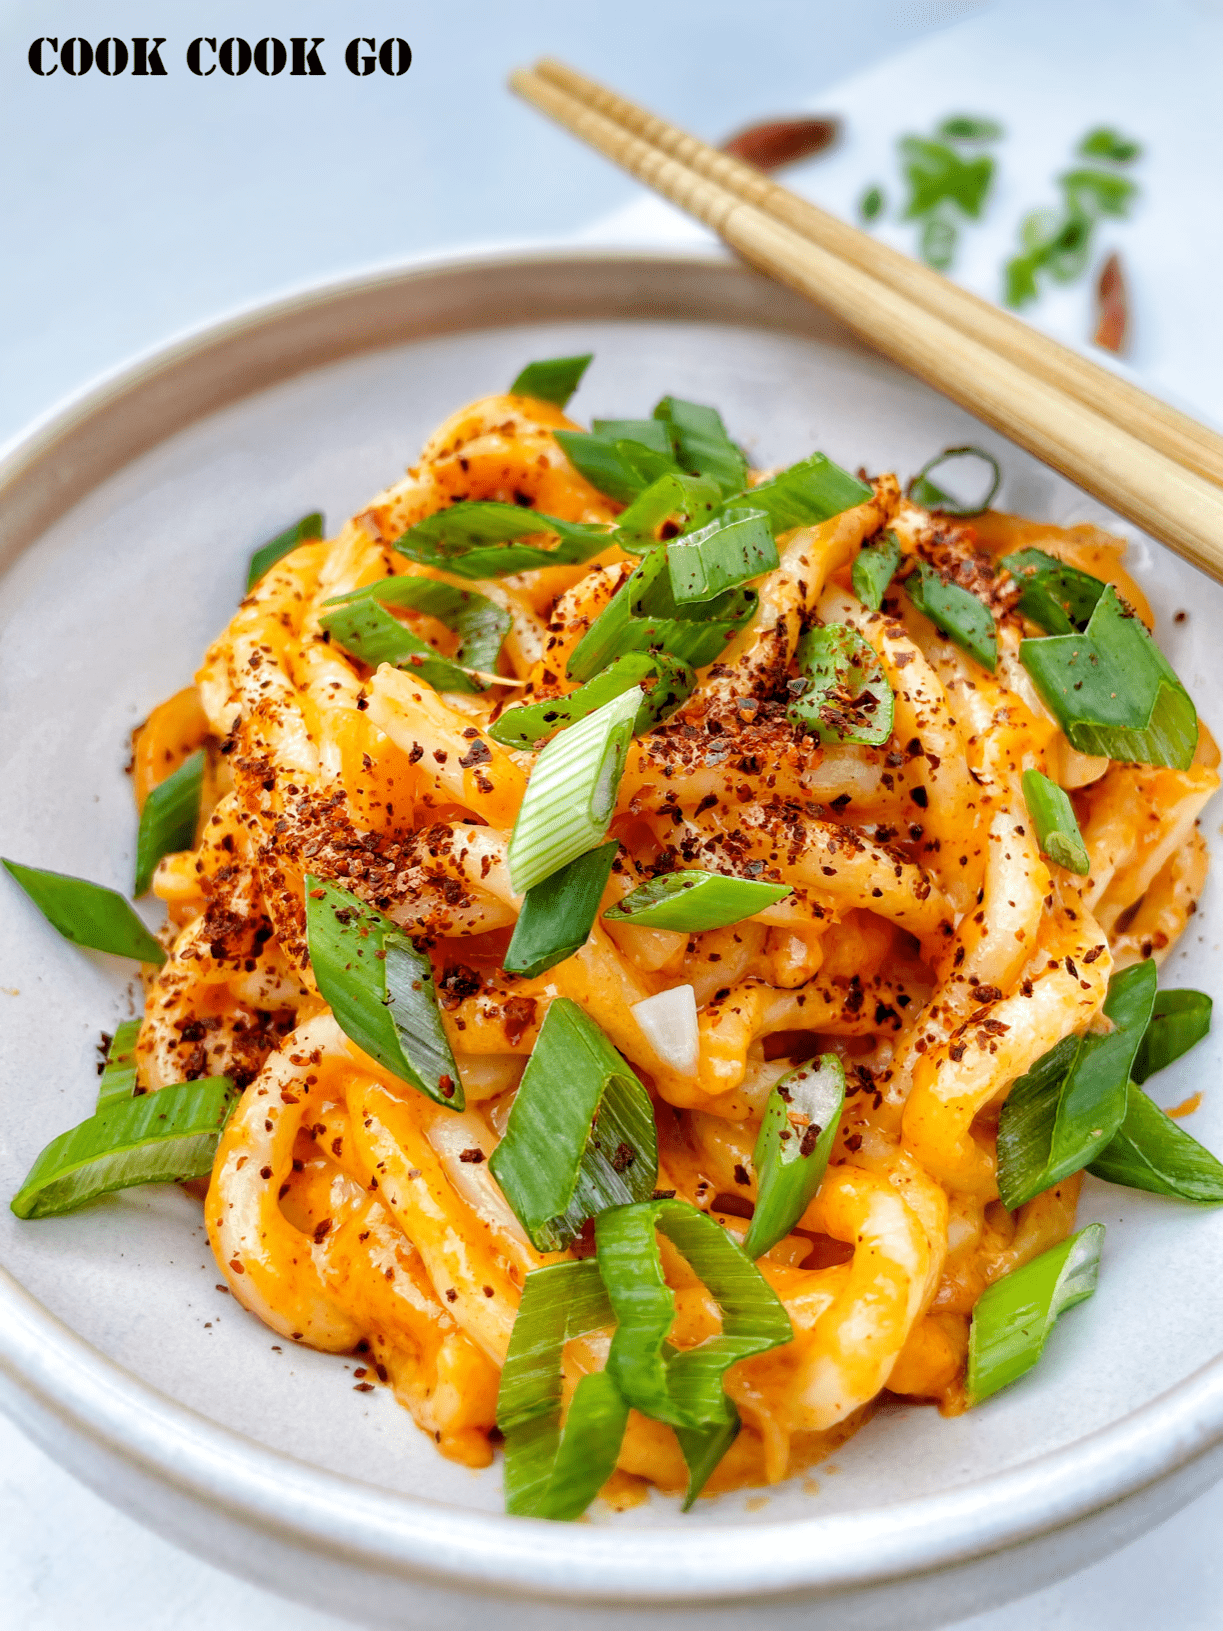 Udon noodles with cheesy and spicy sauce